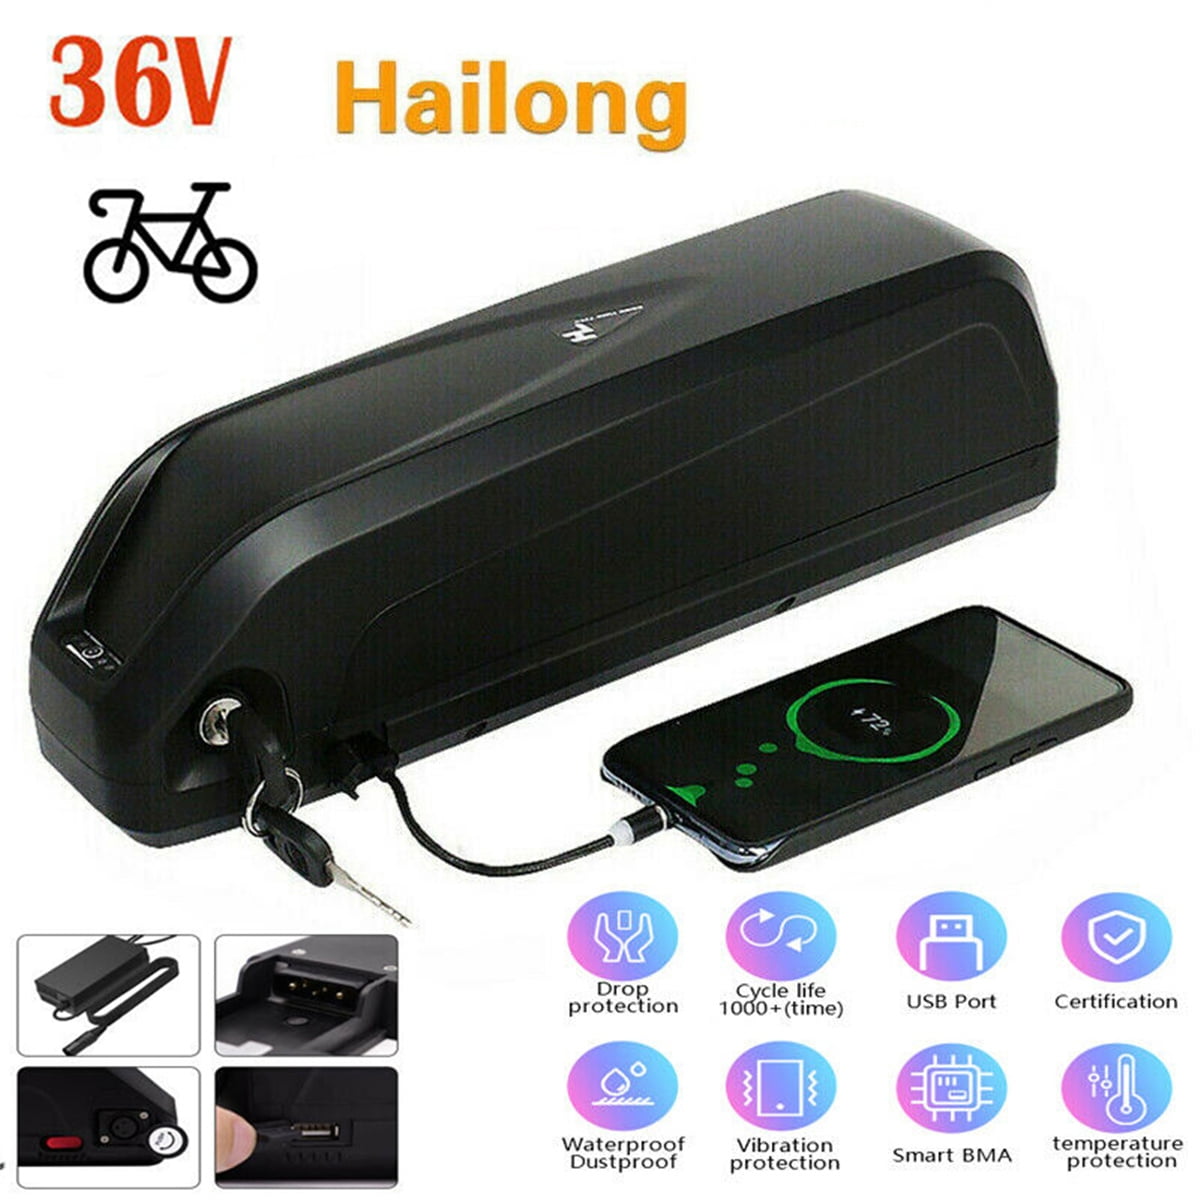 Details about   36V16Ah Lithium li-ion Battery for 500W 750W 1000W ebike Scooter Hub Motor 13s6p